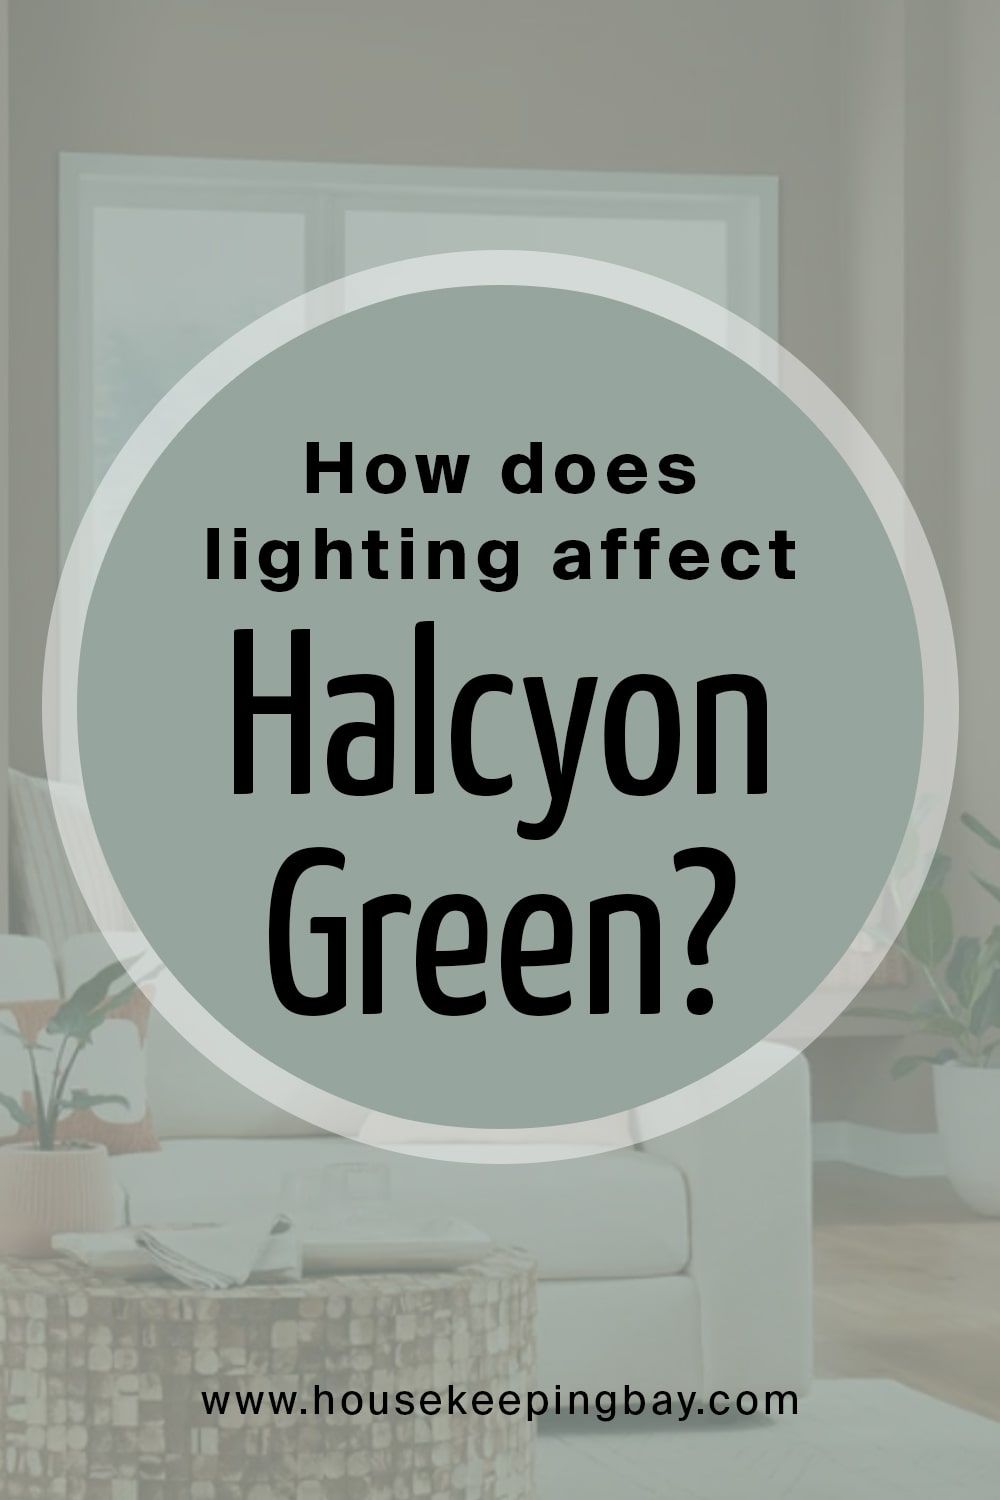 How does lighting affect Halcyon Green